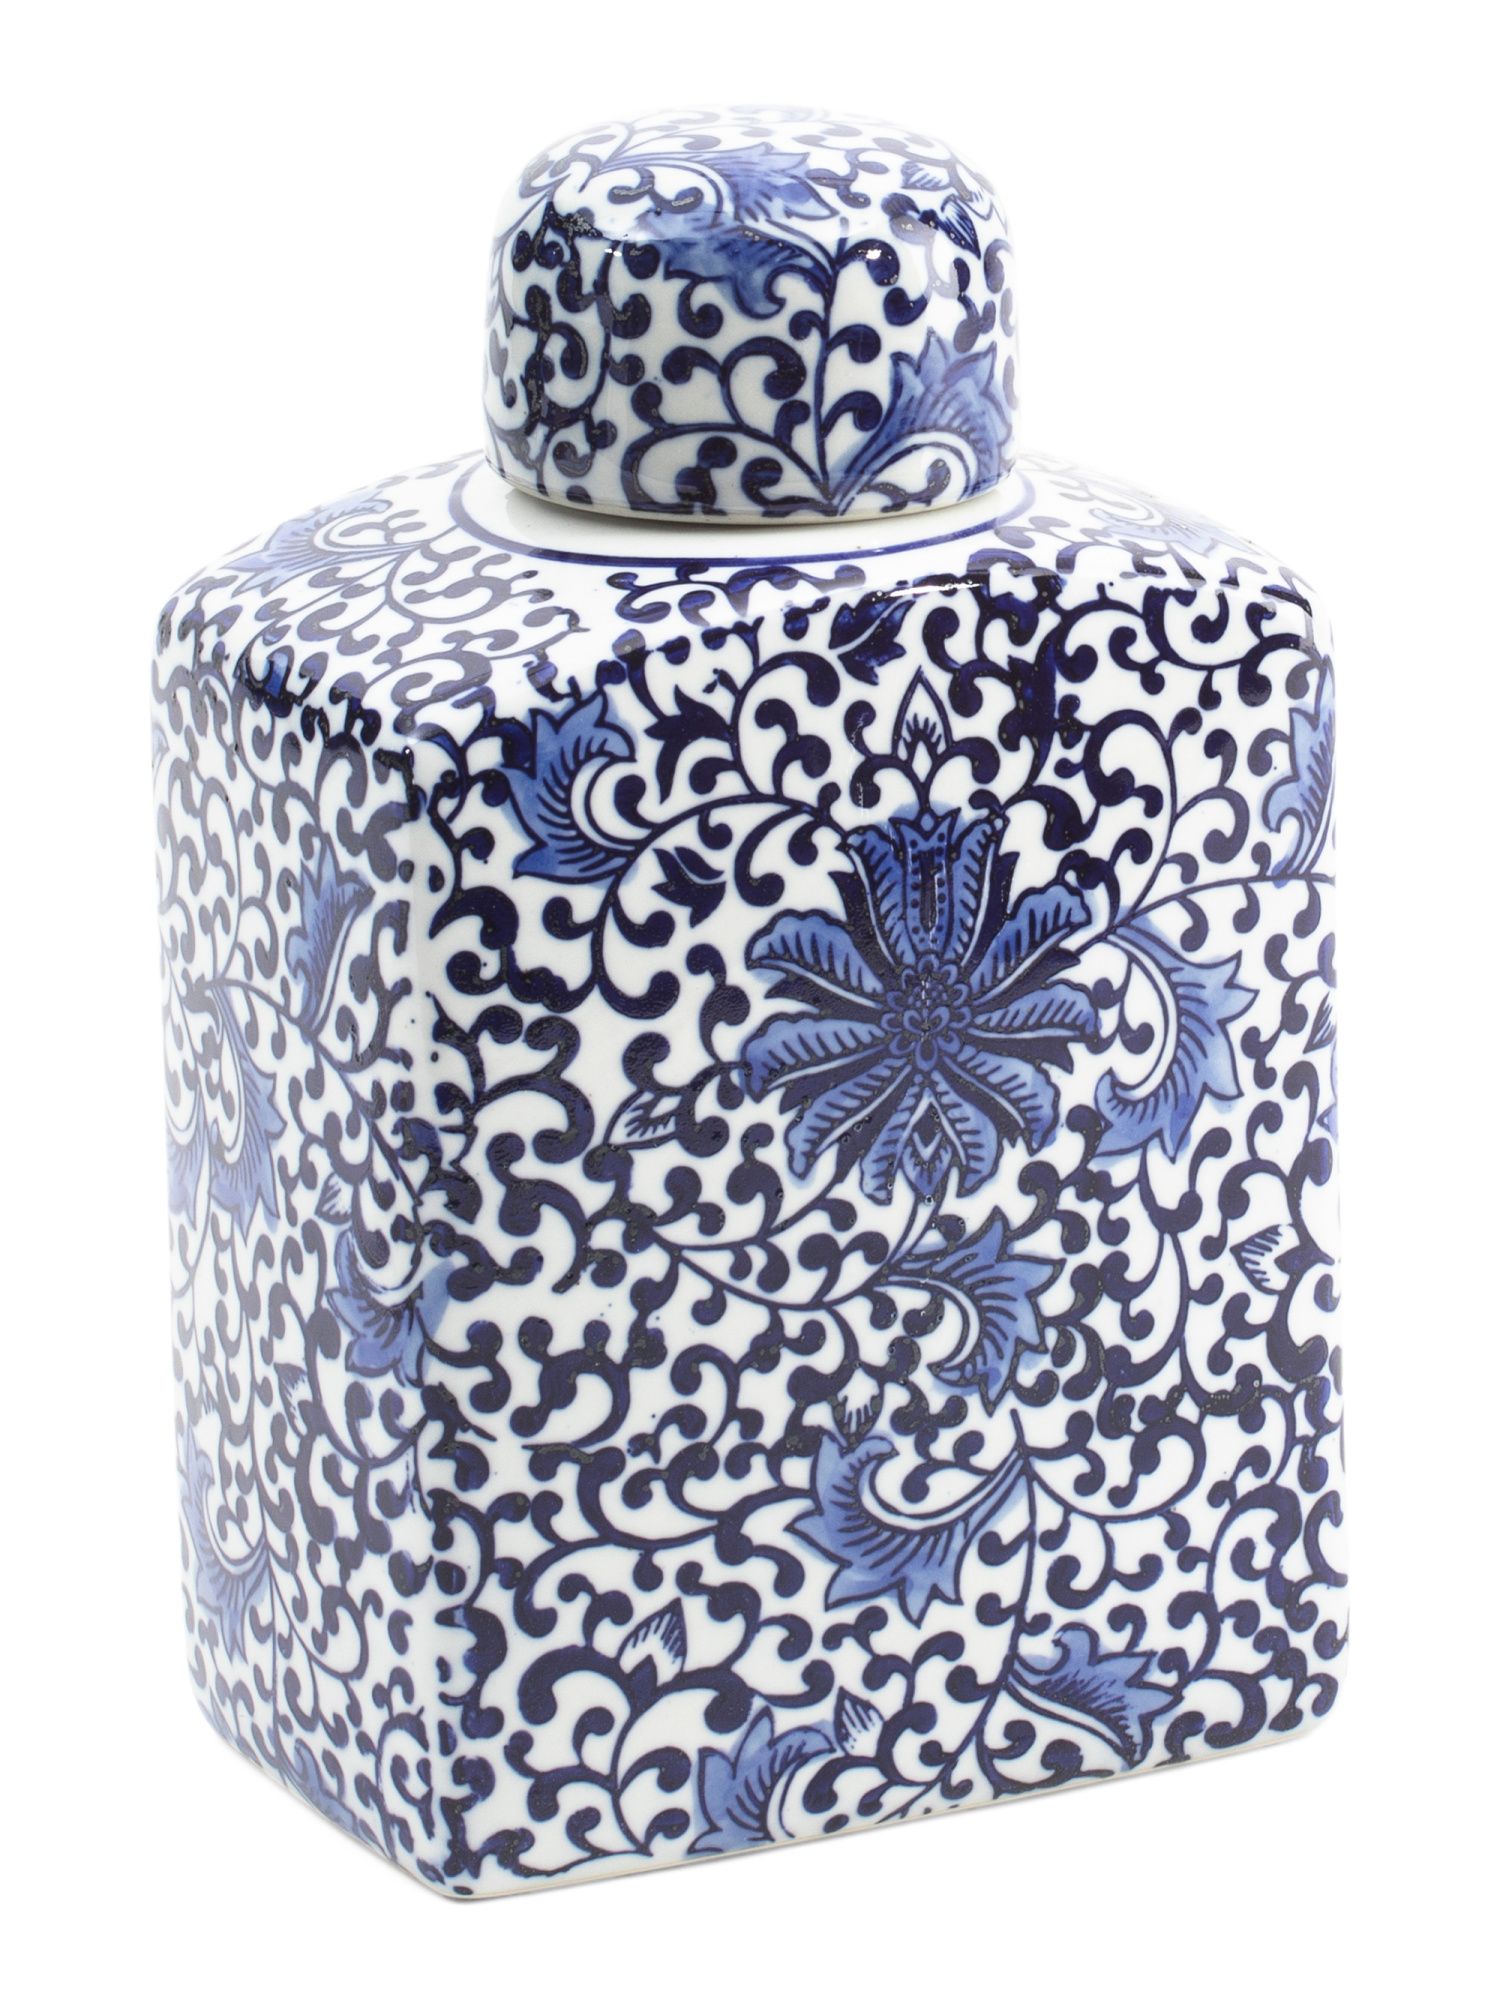 13in Ceramic Chinoiserie Jar With Lid | TJ Maxx